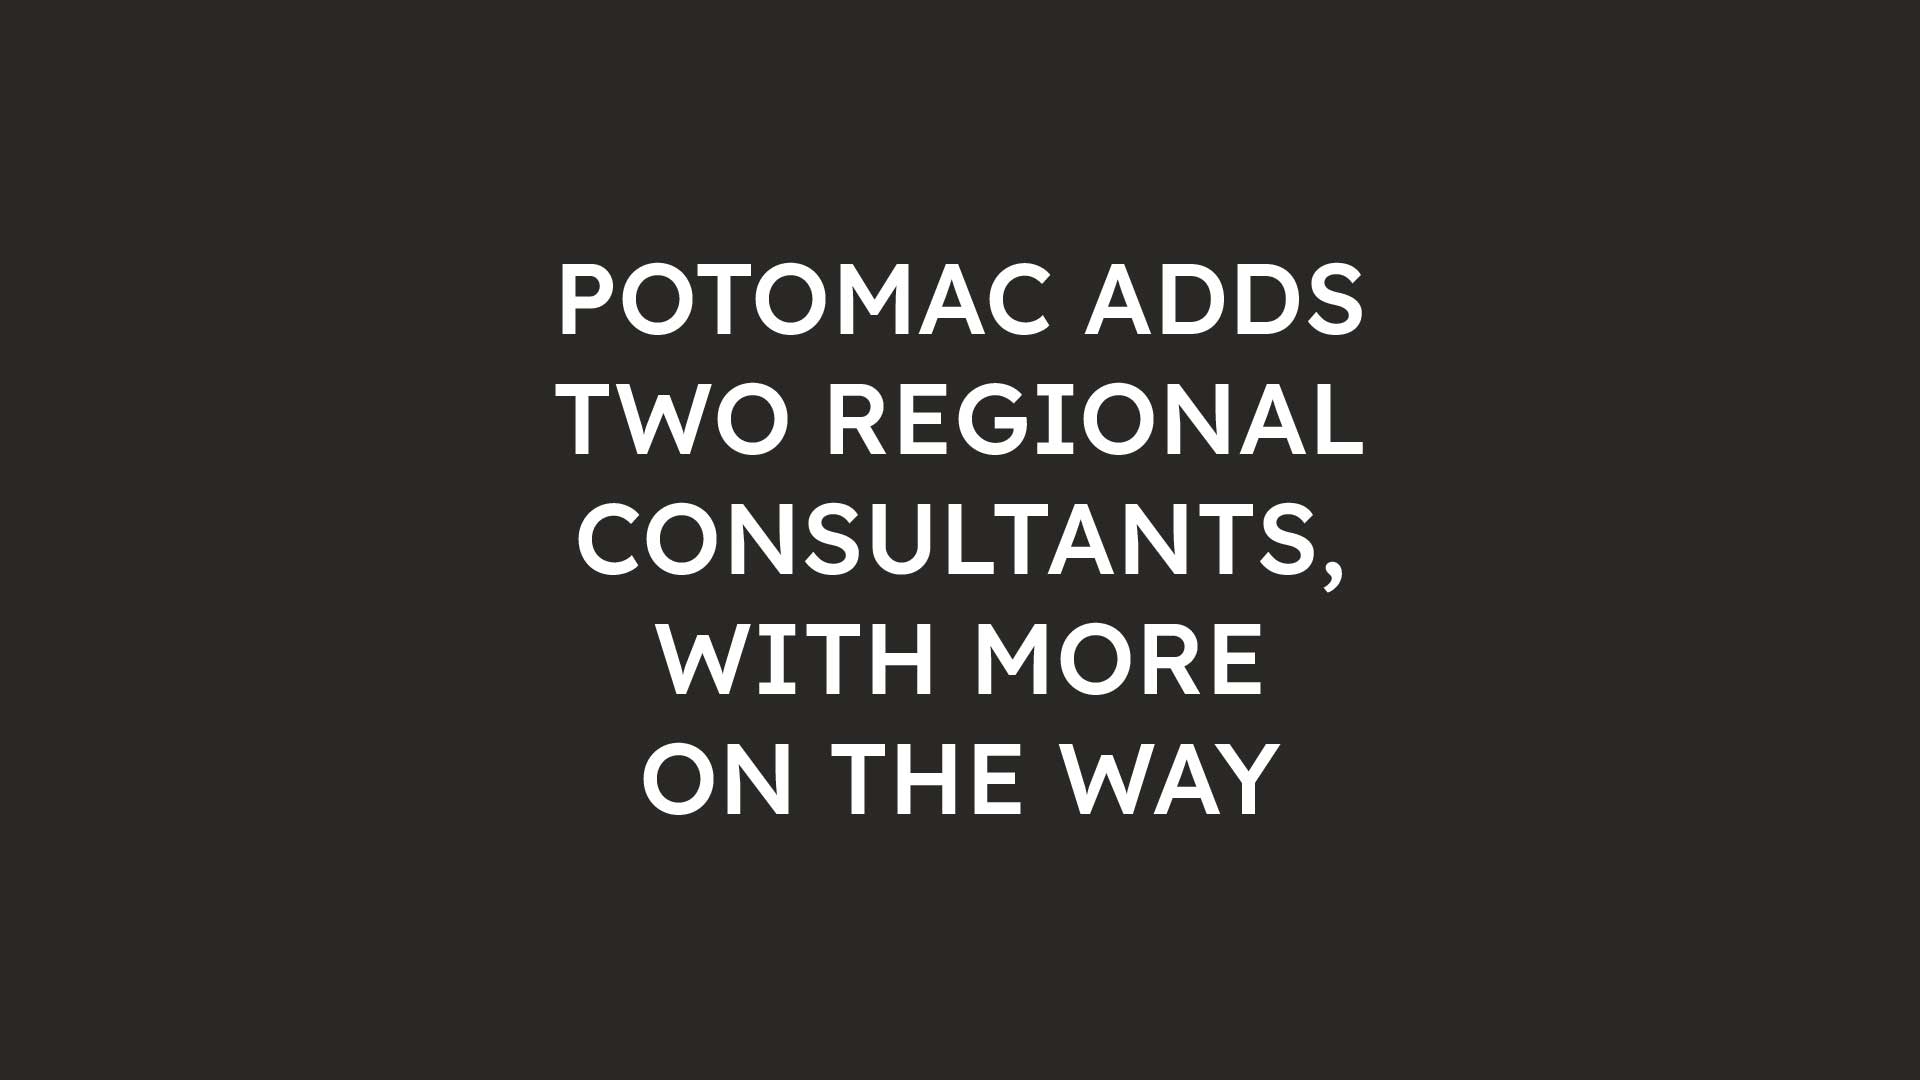 Potomac Adds Two Regional Consultants, with More on the Way